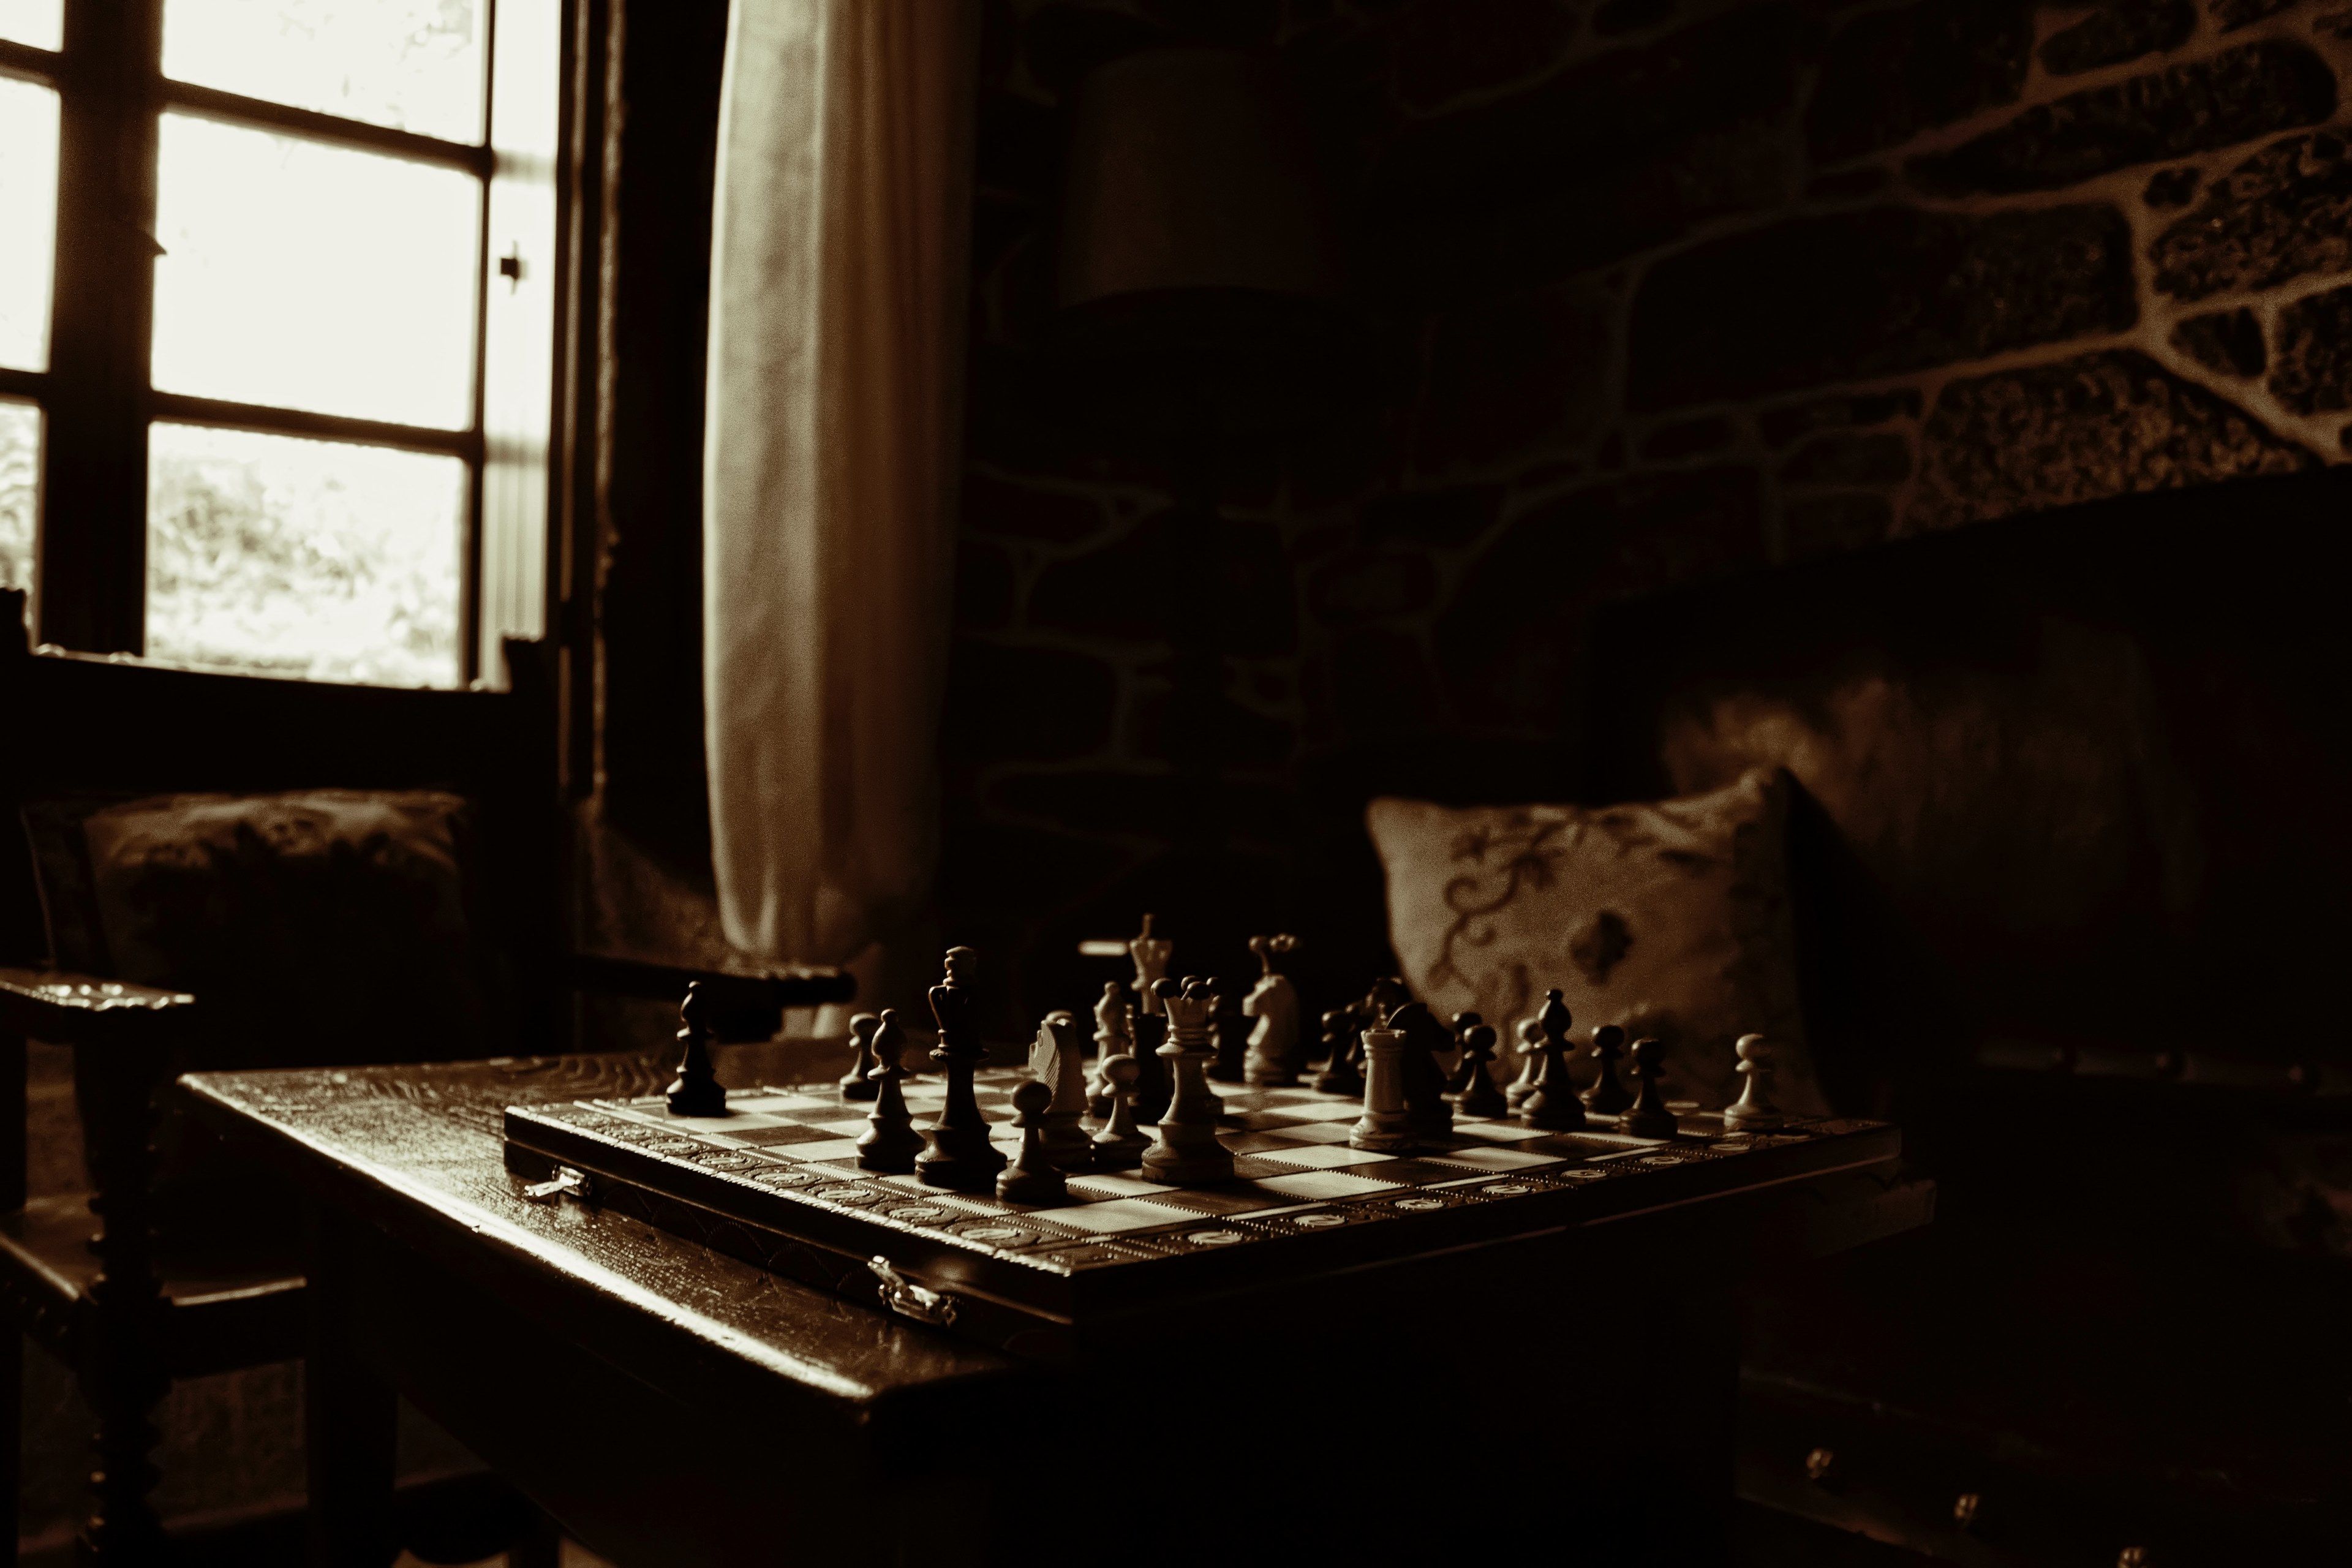 Wallpaper / chess pieces on a board in a dark room, quiet place 4k wallpaper